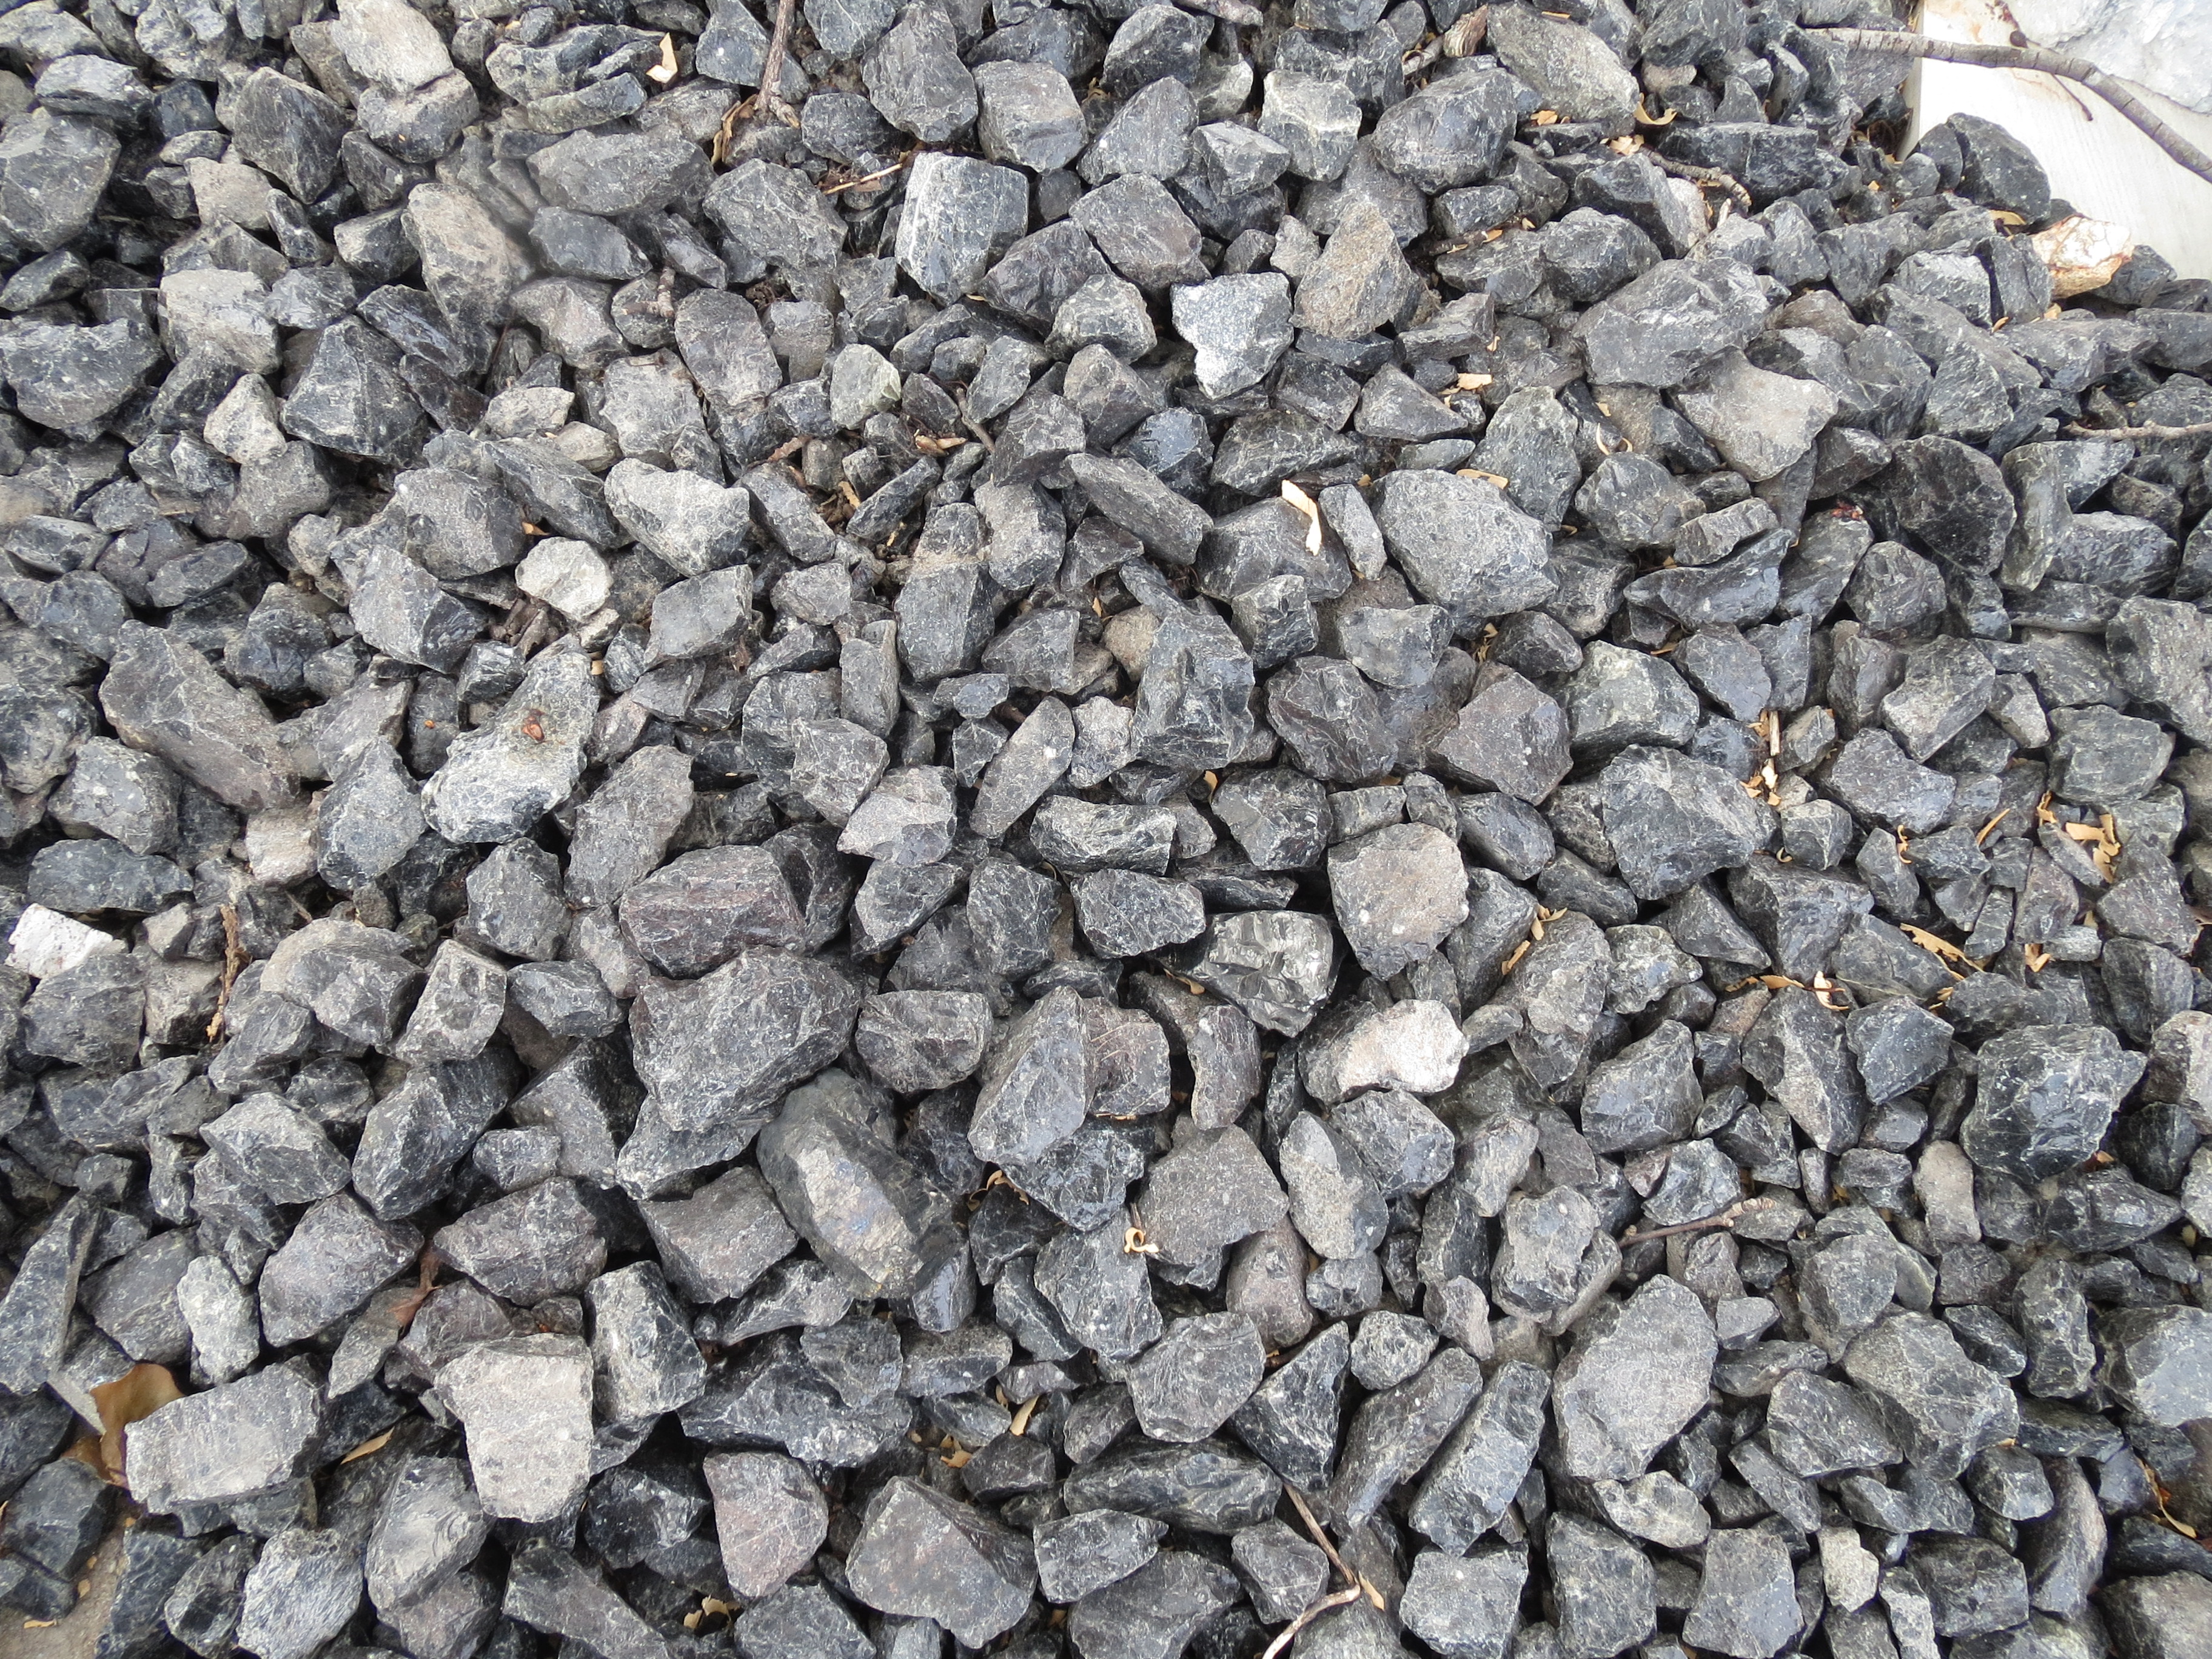 Decorative Stone | Landscaping Supplies, Rocks and Statuary in ...